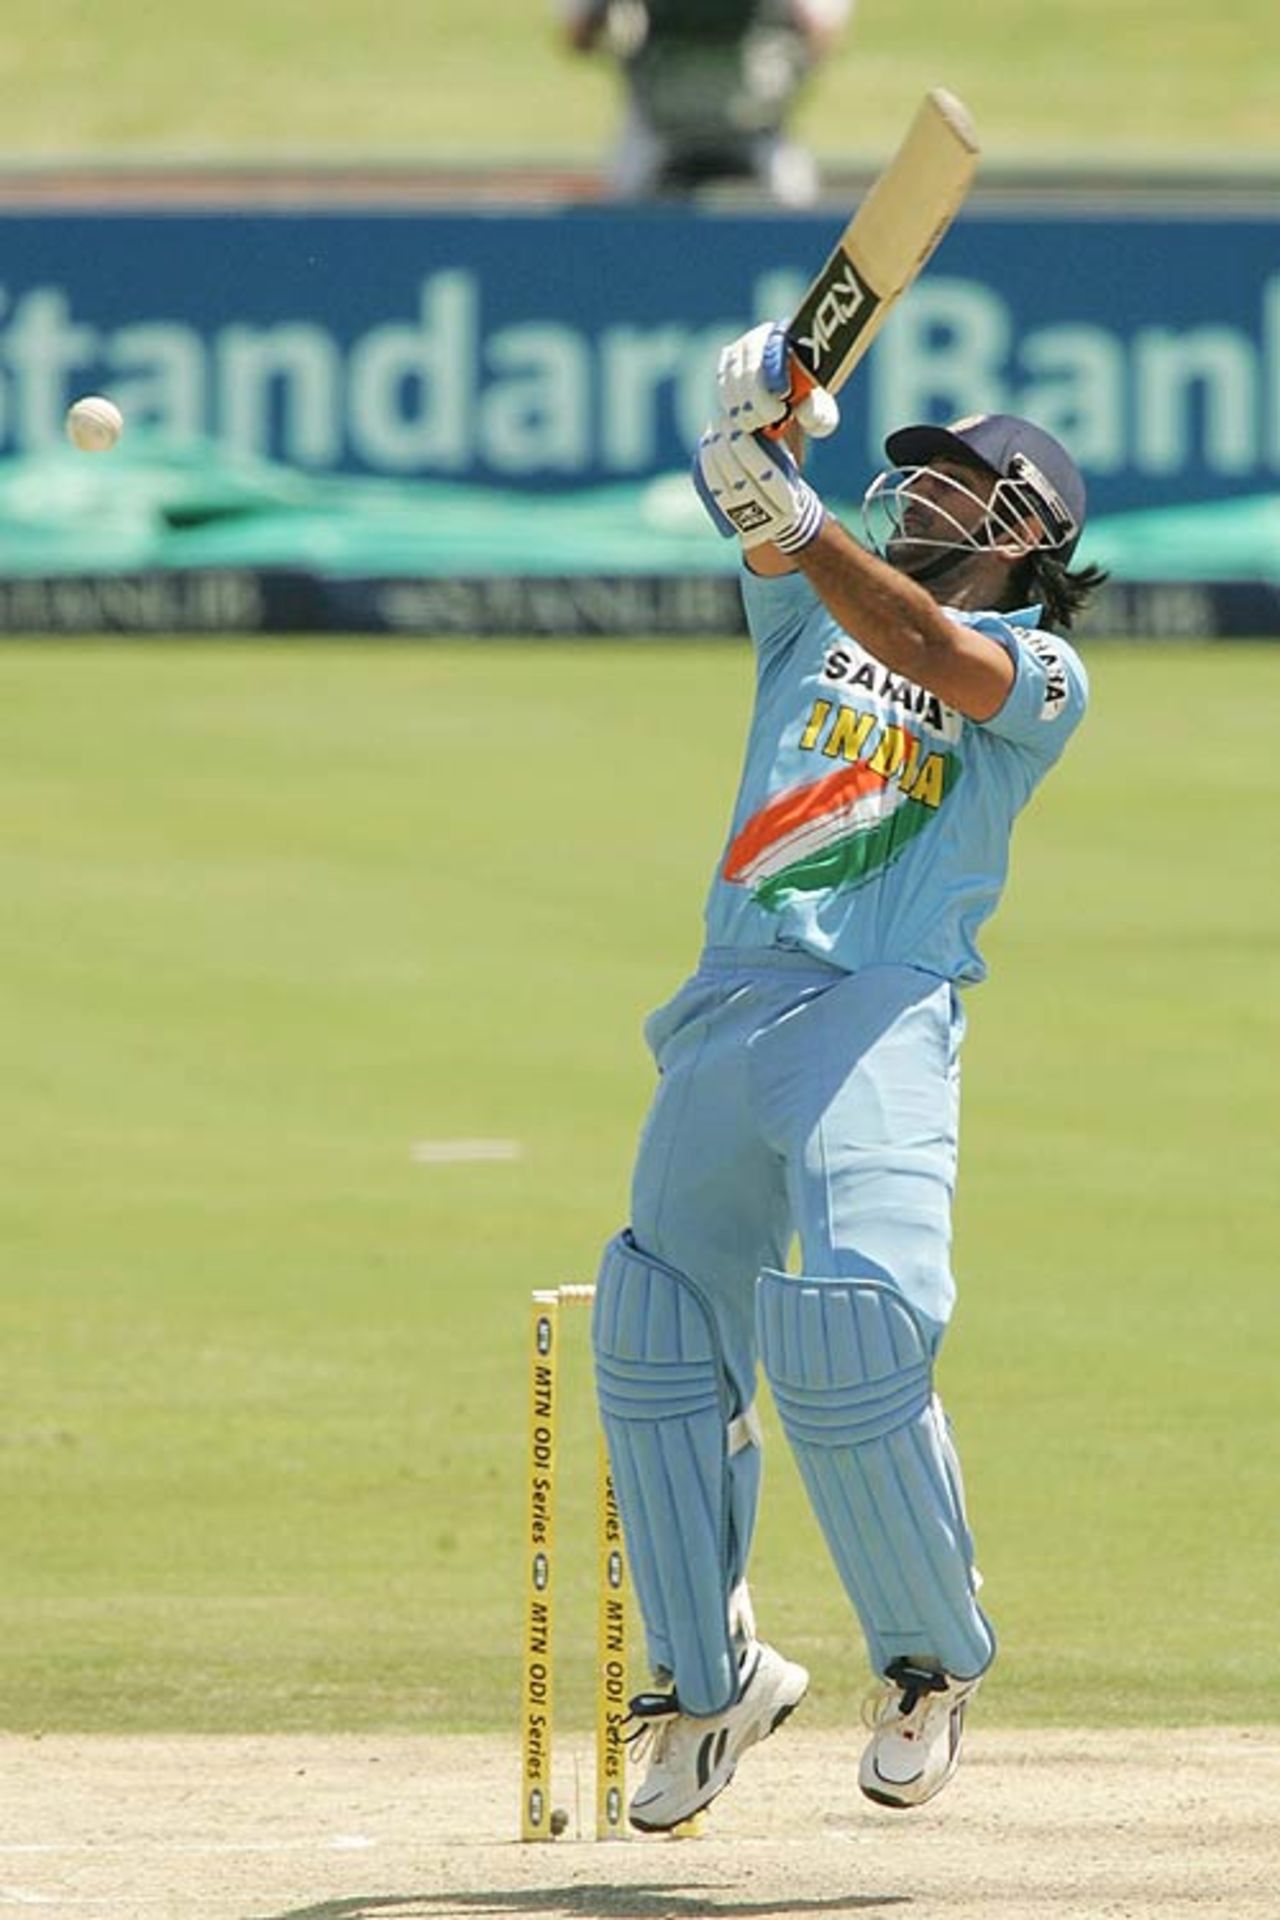 A typical Mahendra Singh Dhoni shot, South Africa v India, 5th ODI, Centurion, December 3, 2006